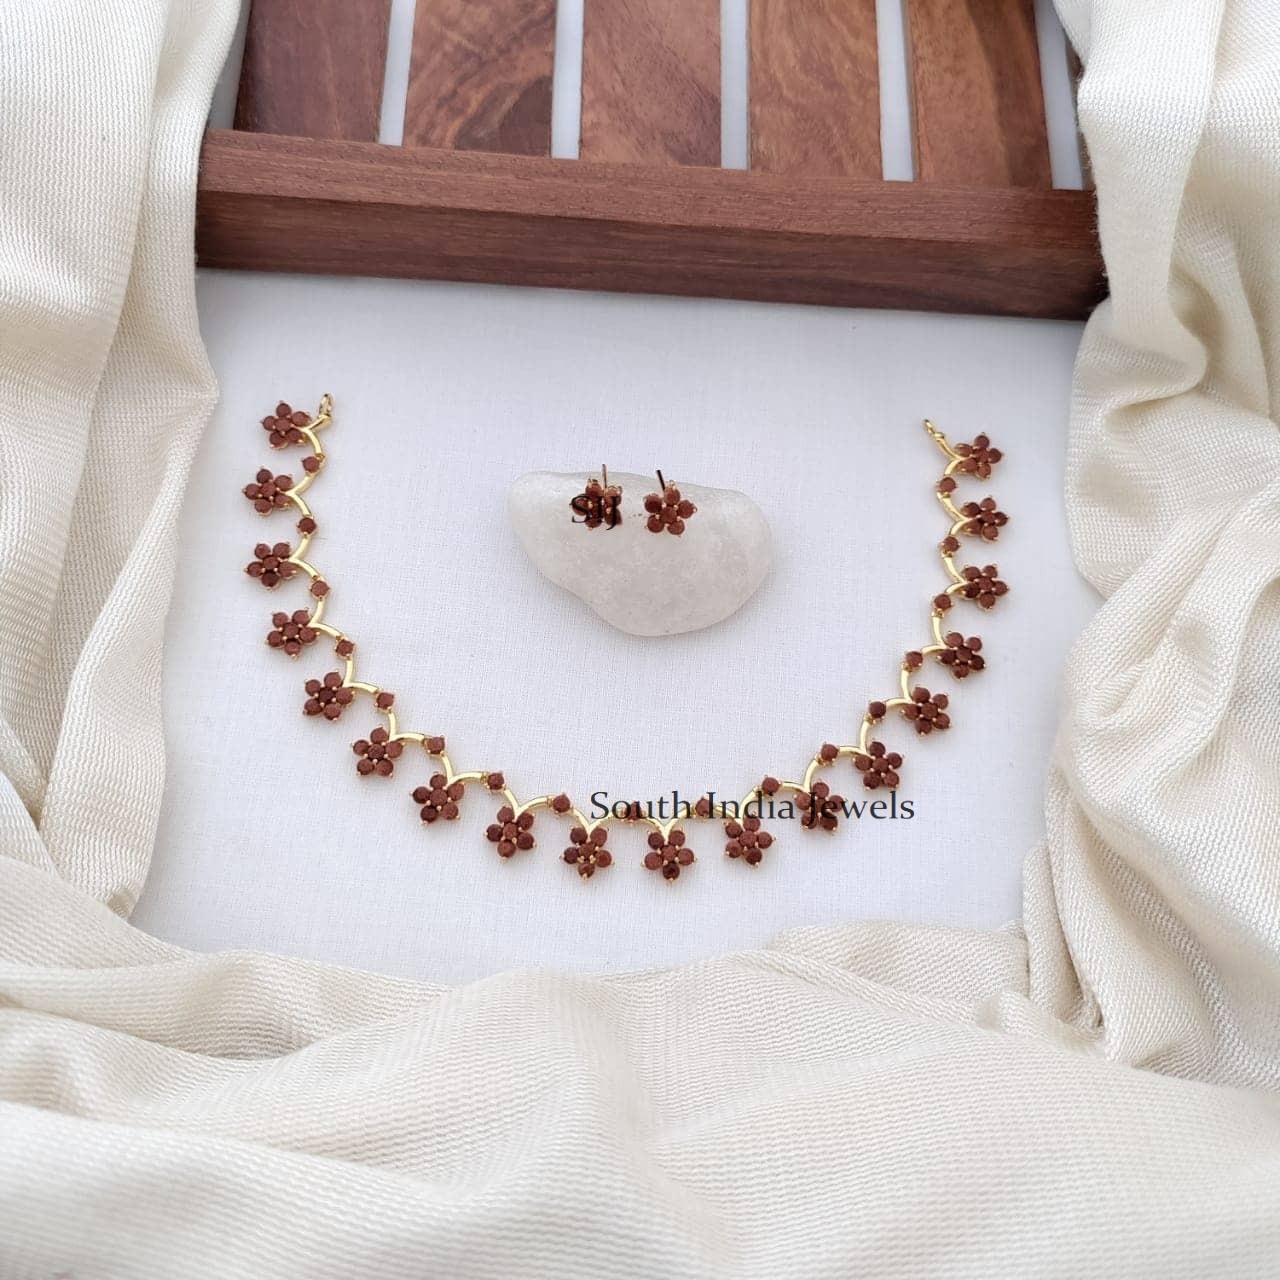 Stunning Sand Stone Floral Necklace